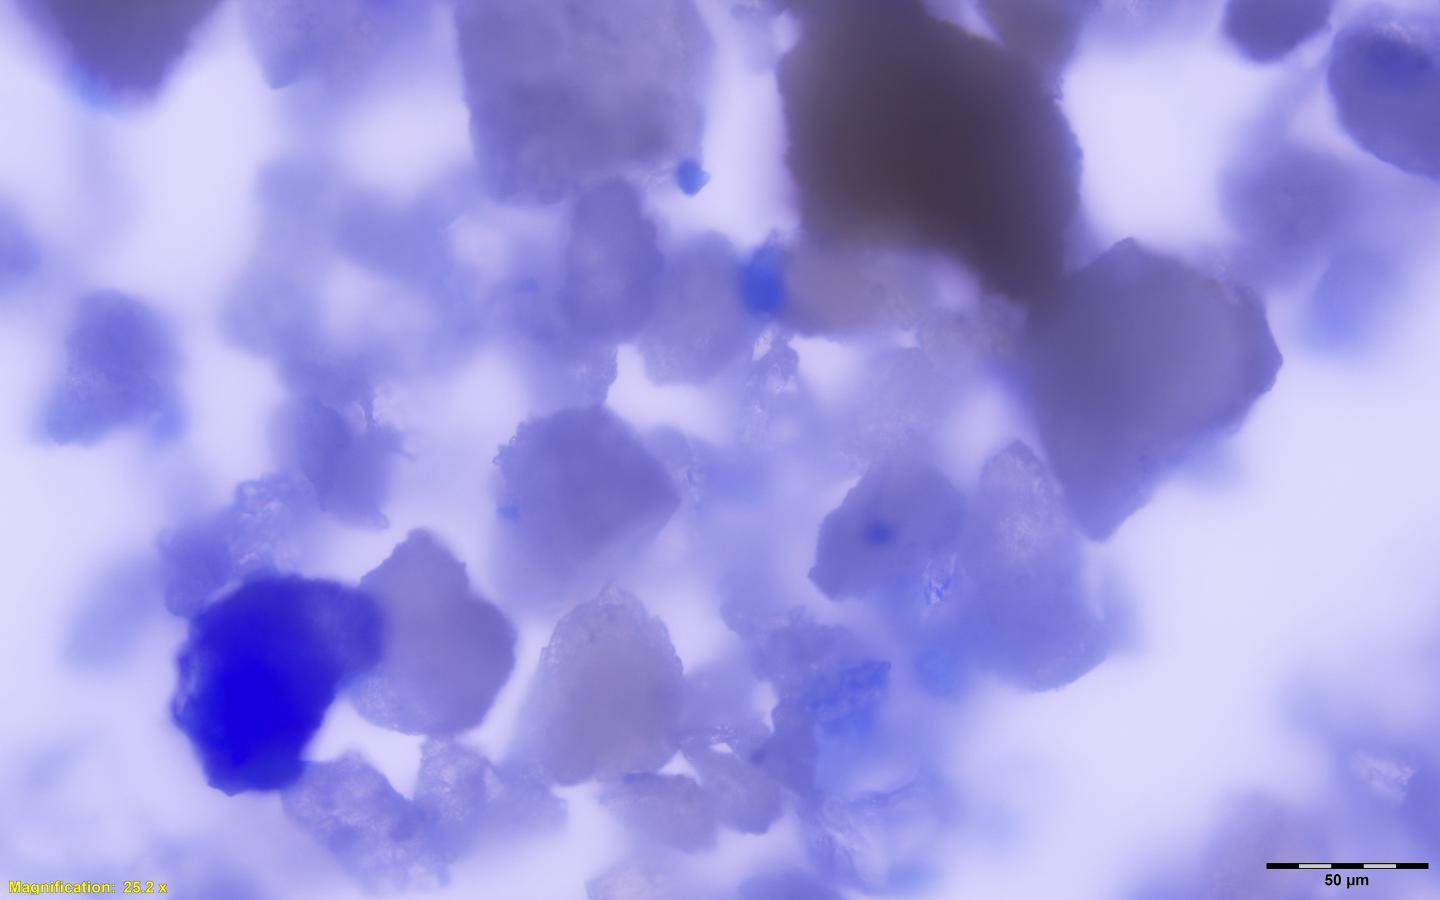 Rare and Expensive Blue Pigment Found in the Dental Calculus of a Medieval-Era Woman (8 of 8)